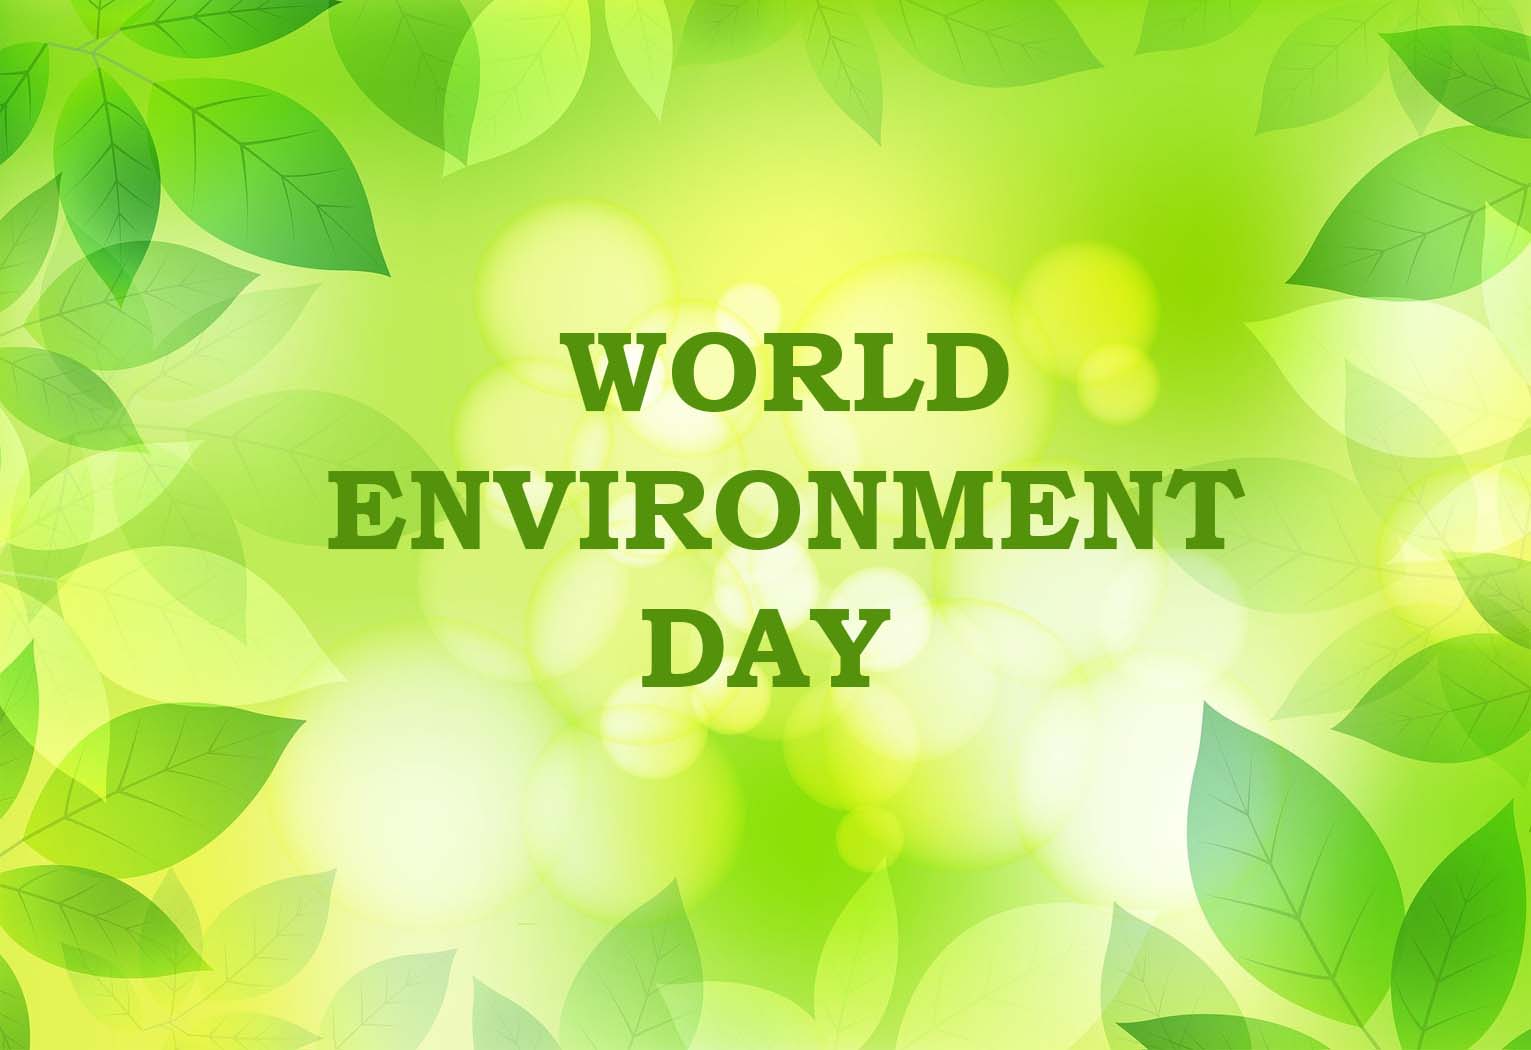 Environment Day 2022 images